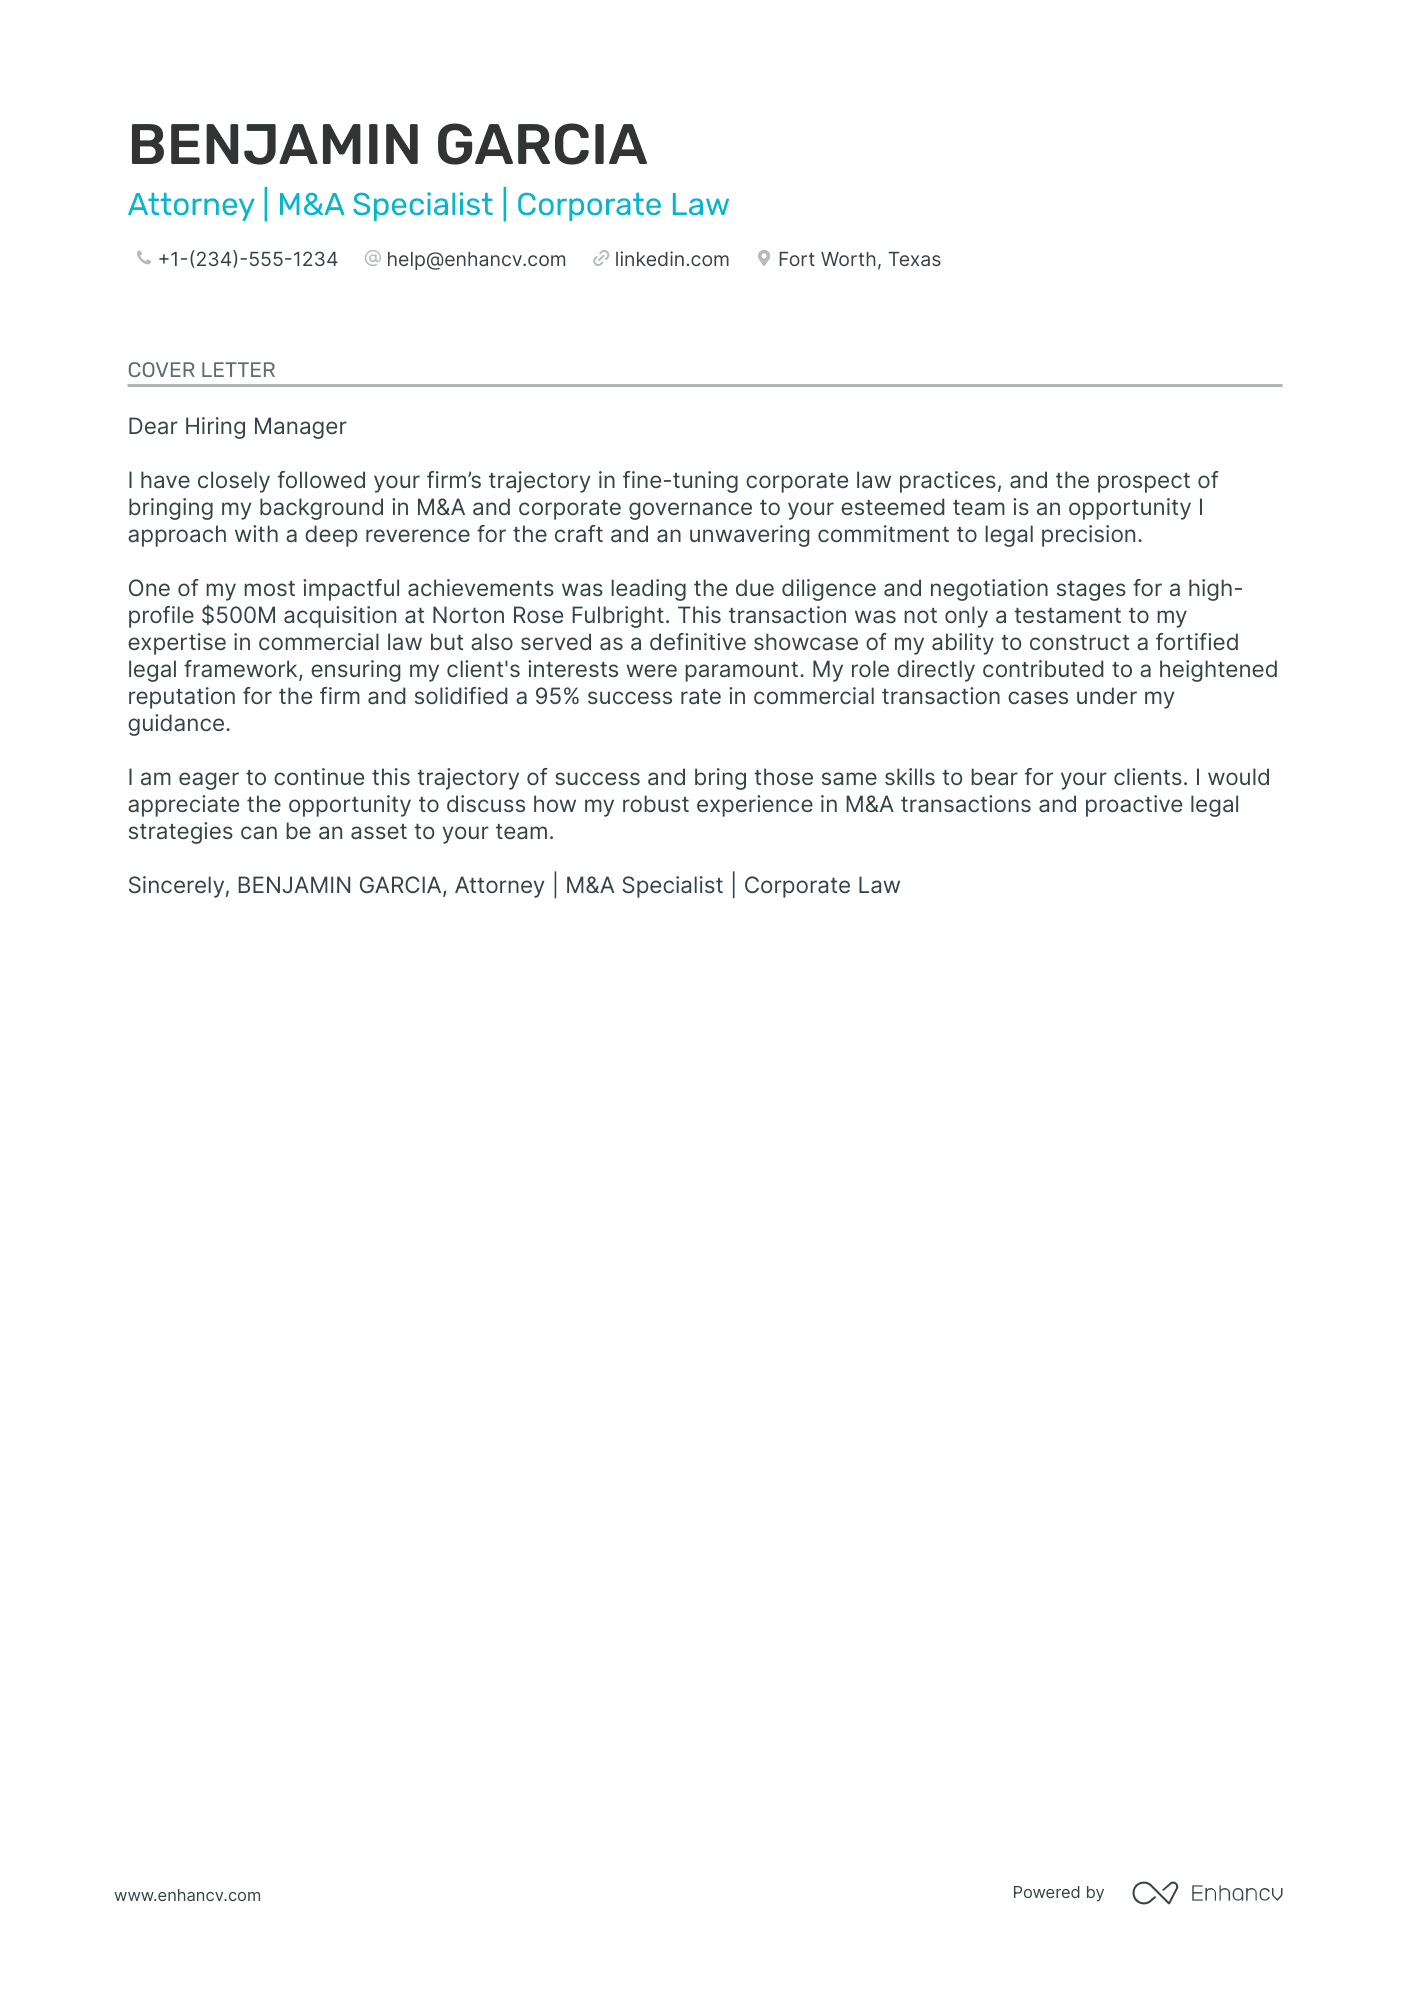 Corporate Lawyer cover letter